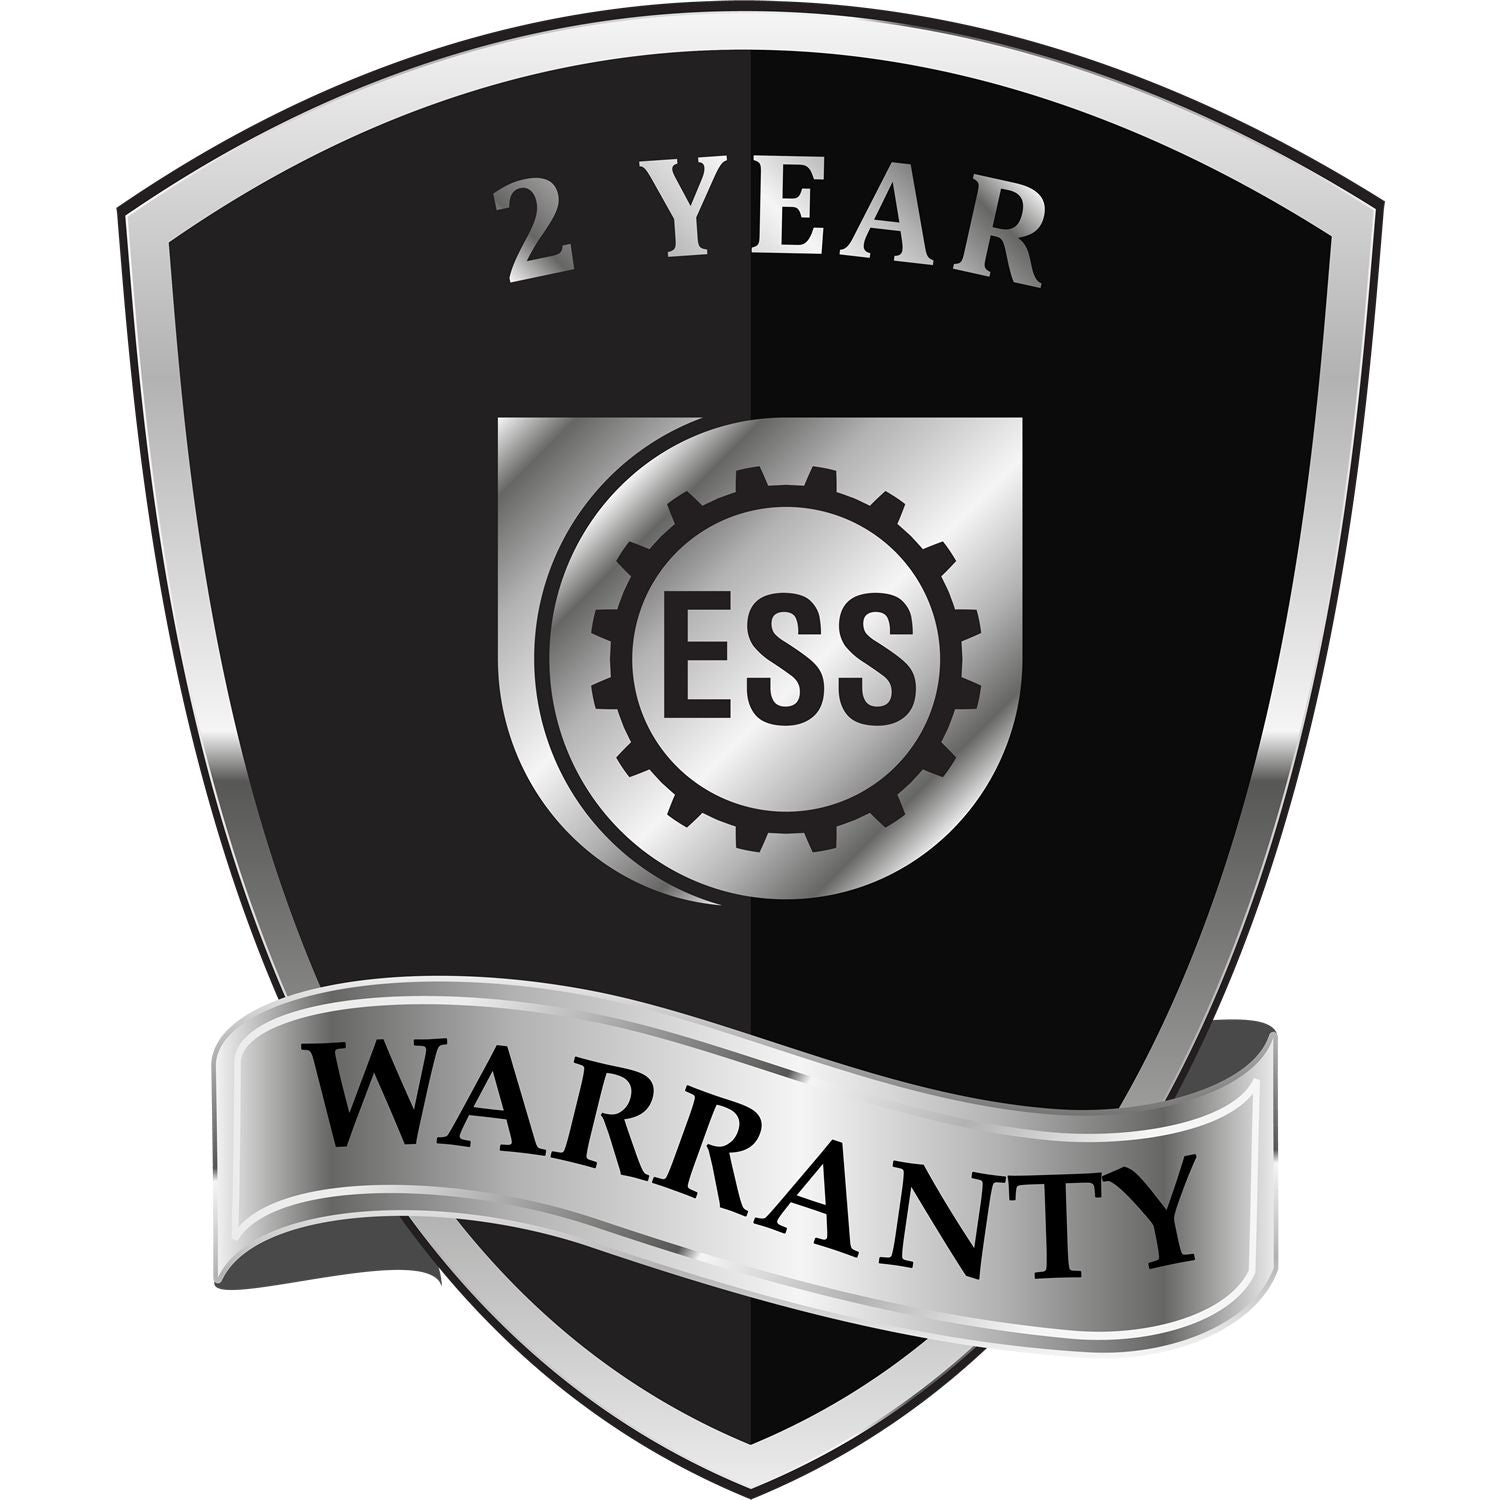 A badge or emblem showing a warranty icon for the Heavy Duty Cast Iron Wisconsin Engineer Seal Embosser